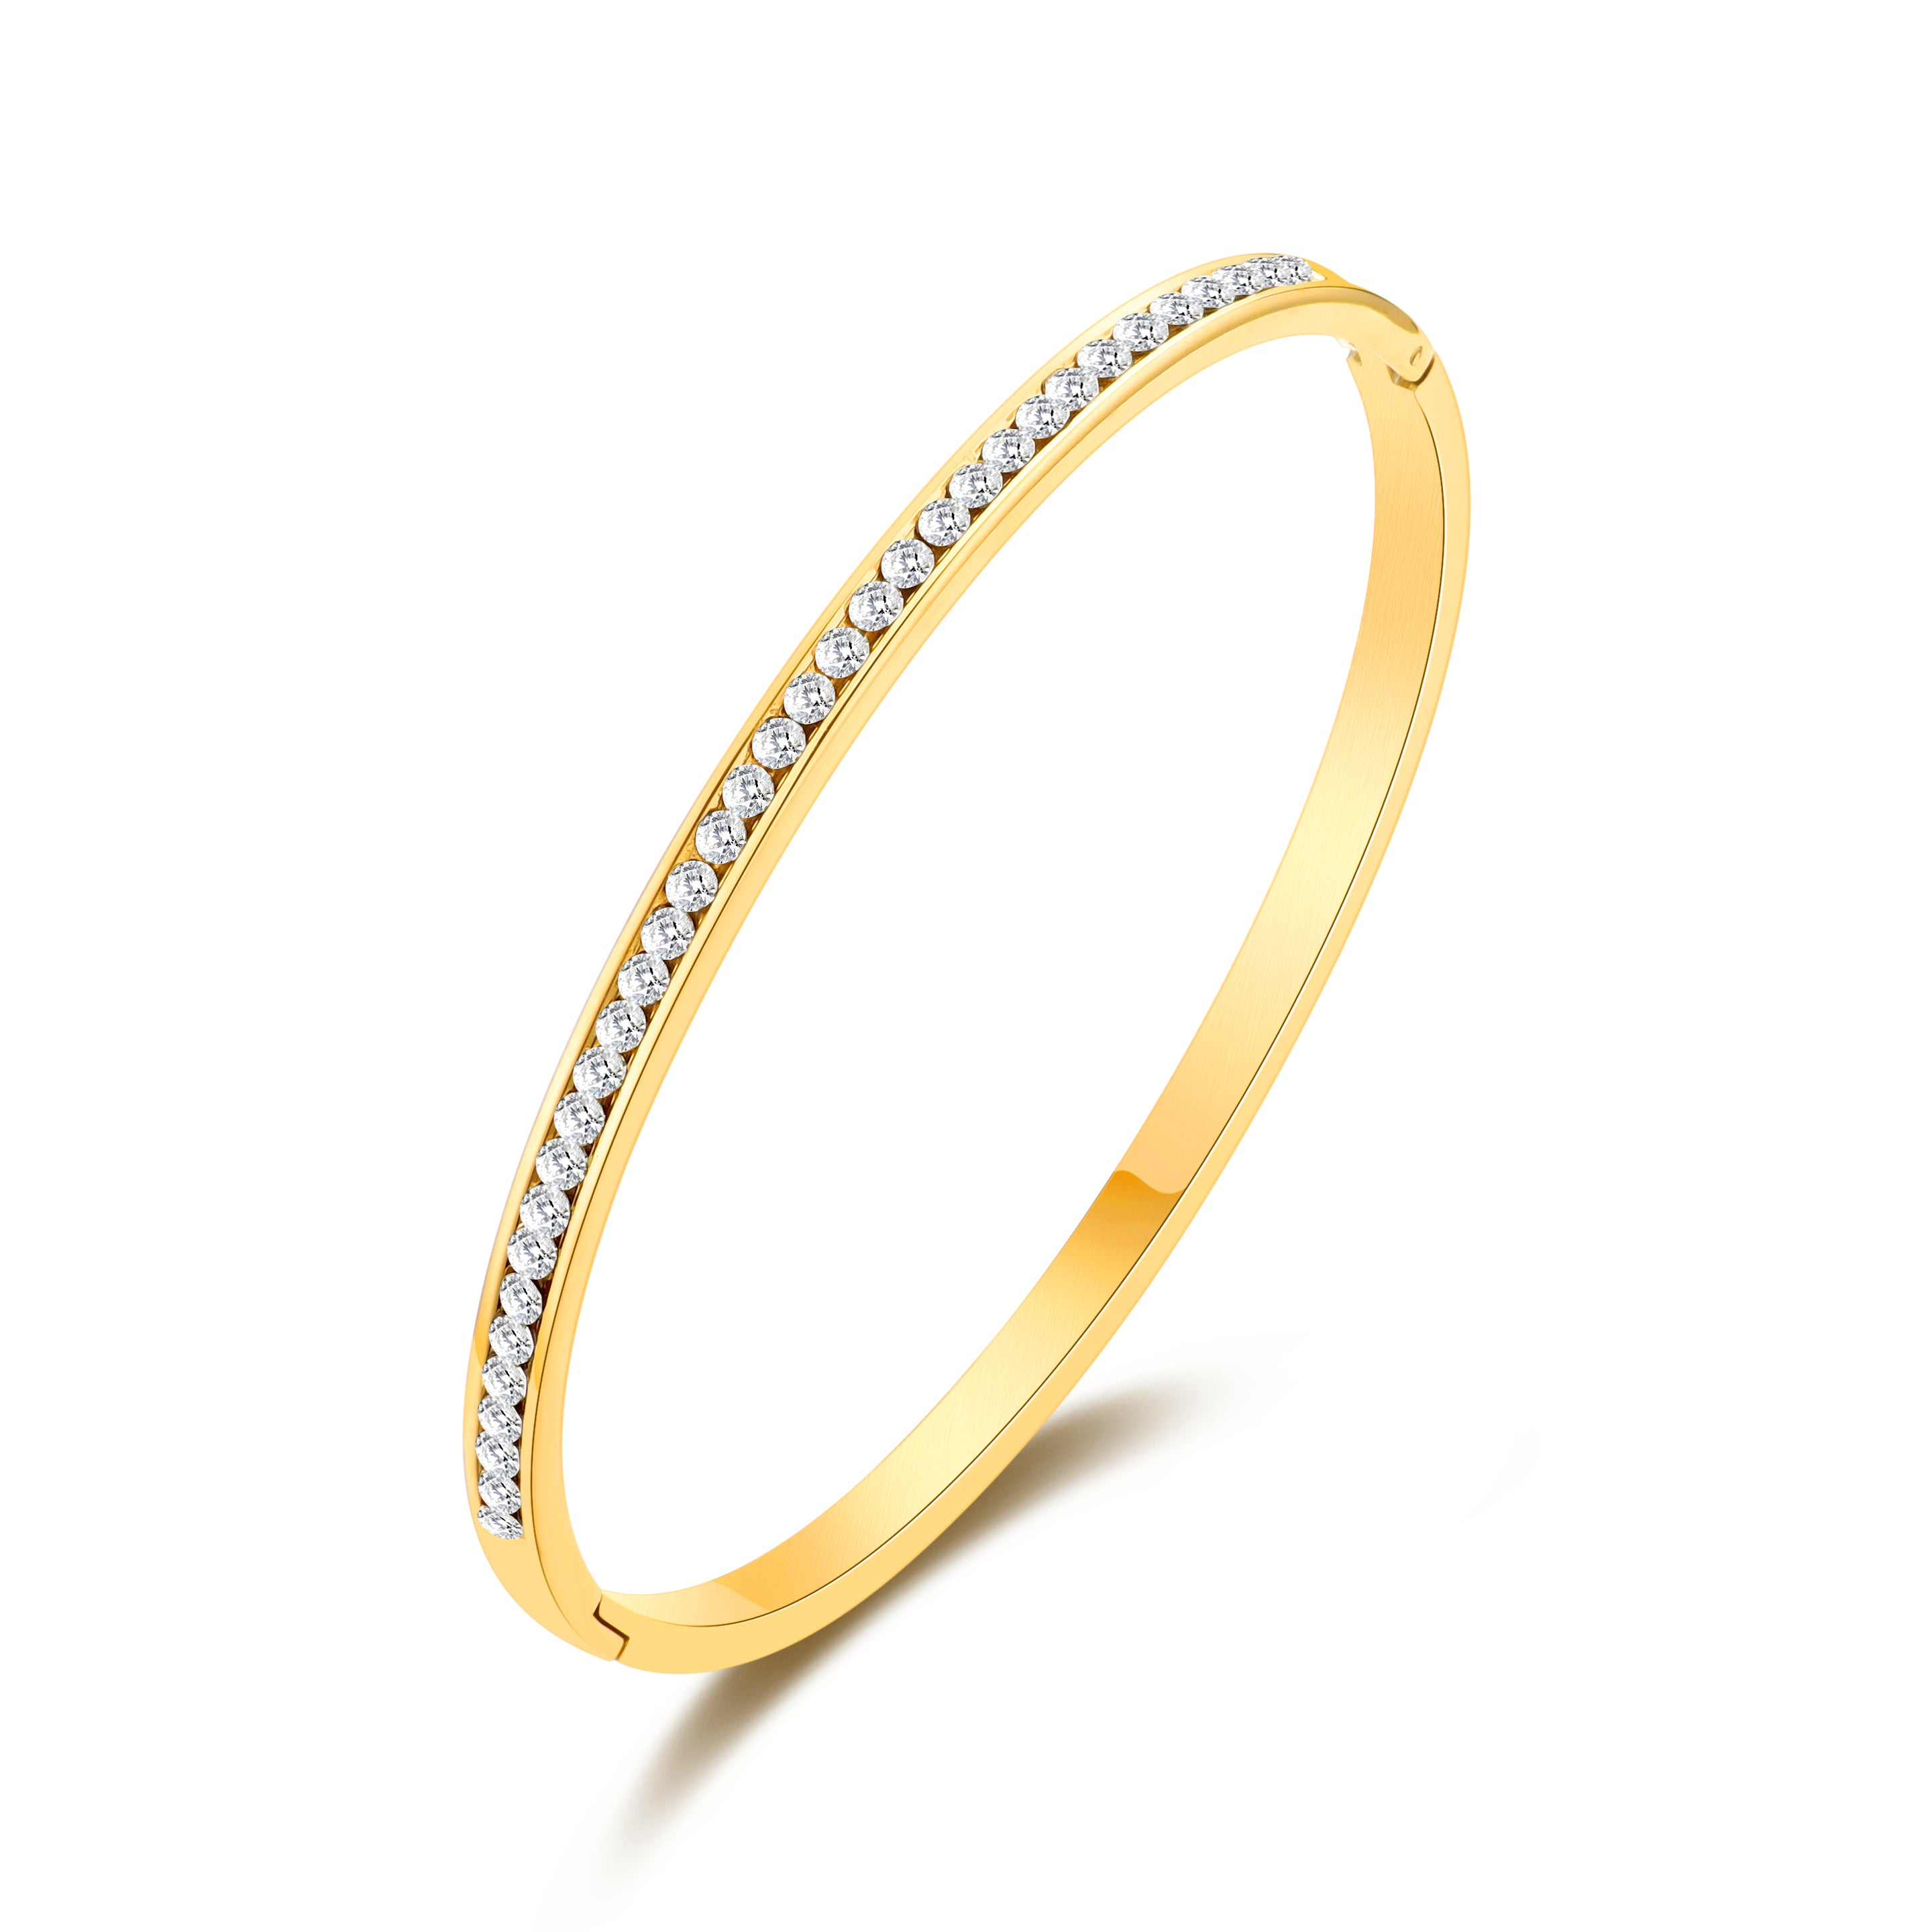 Gold Plated Channel Set Bangle Created with Zircondia® Crystals by Philip Jones Jewellery